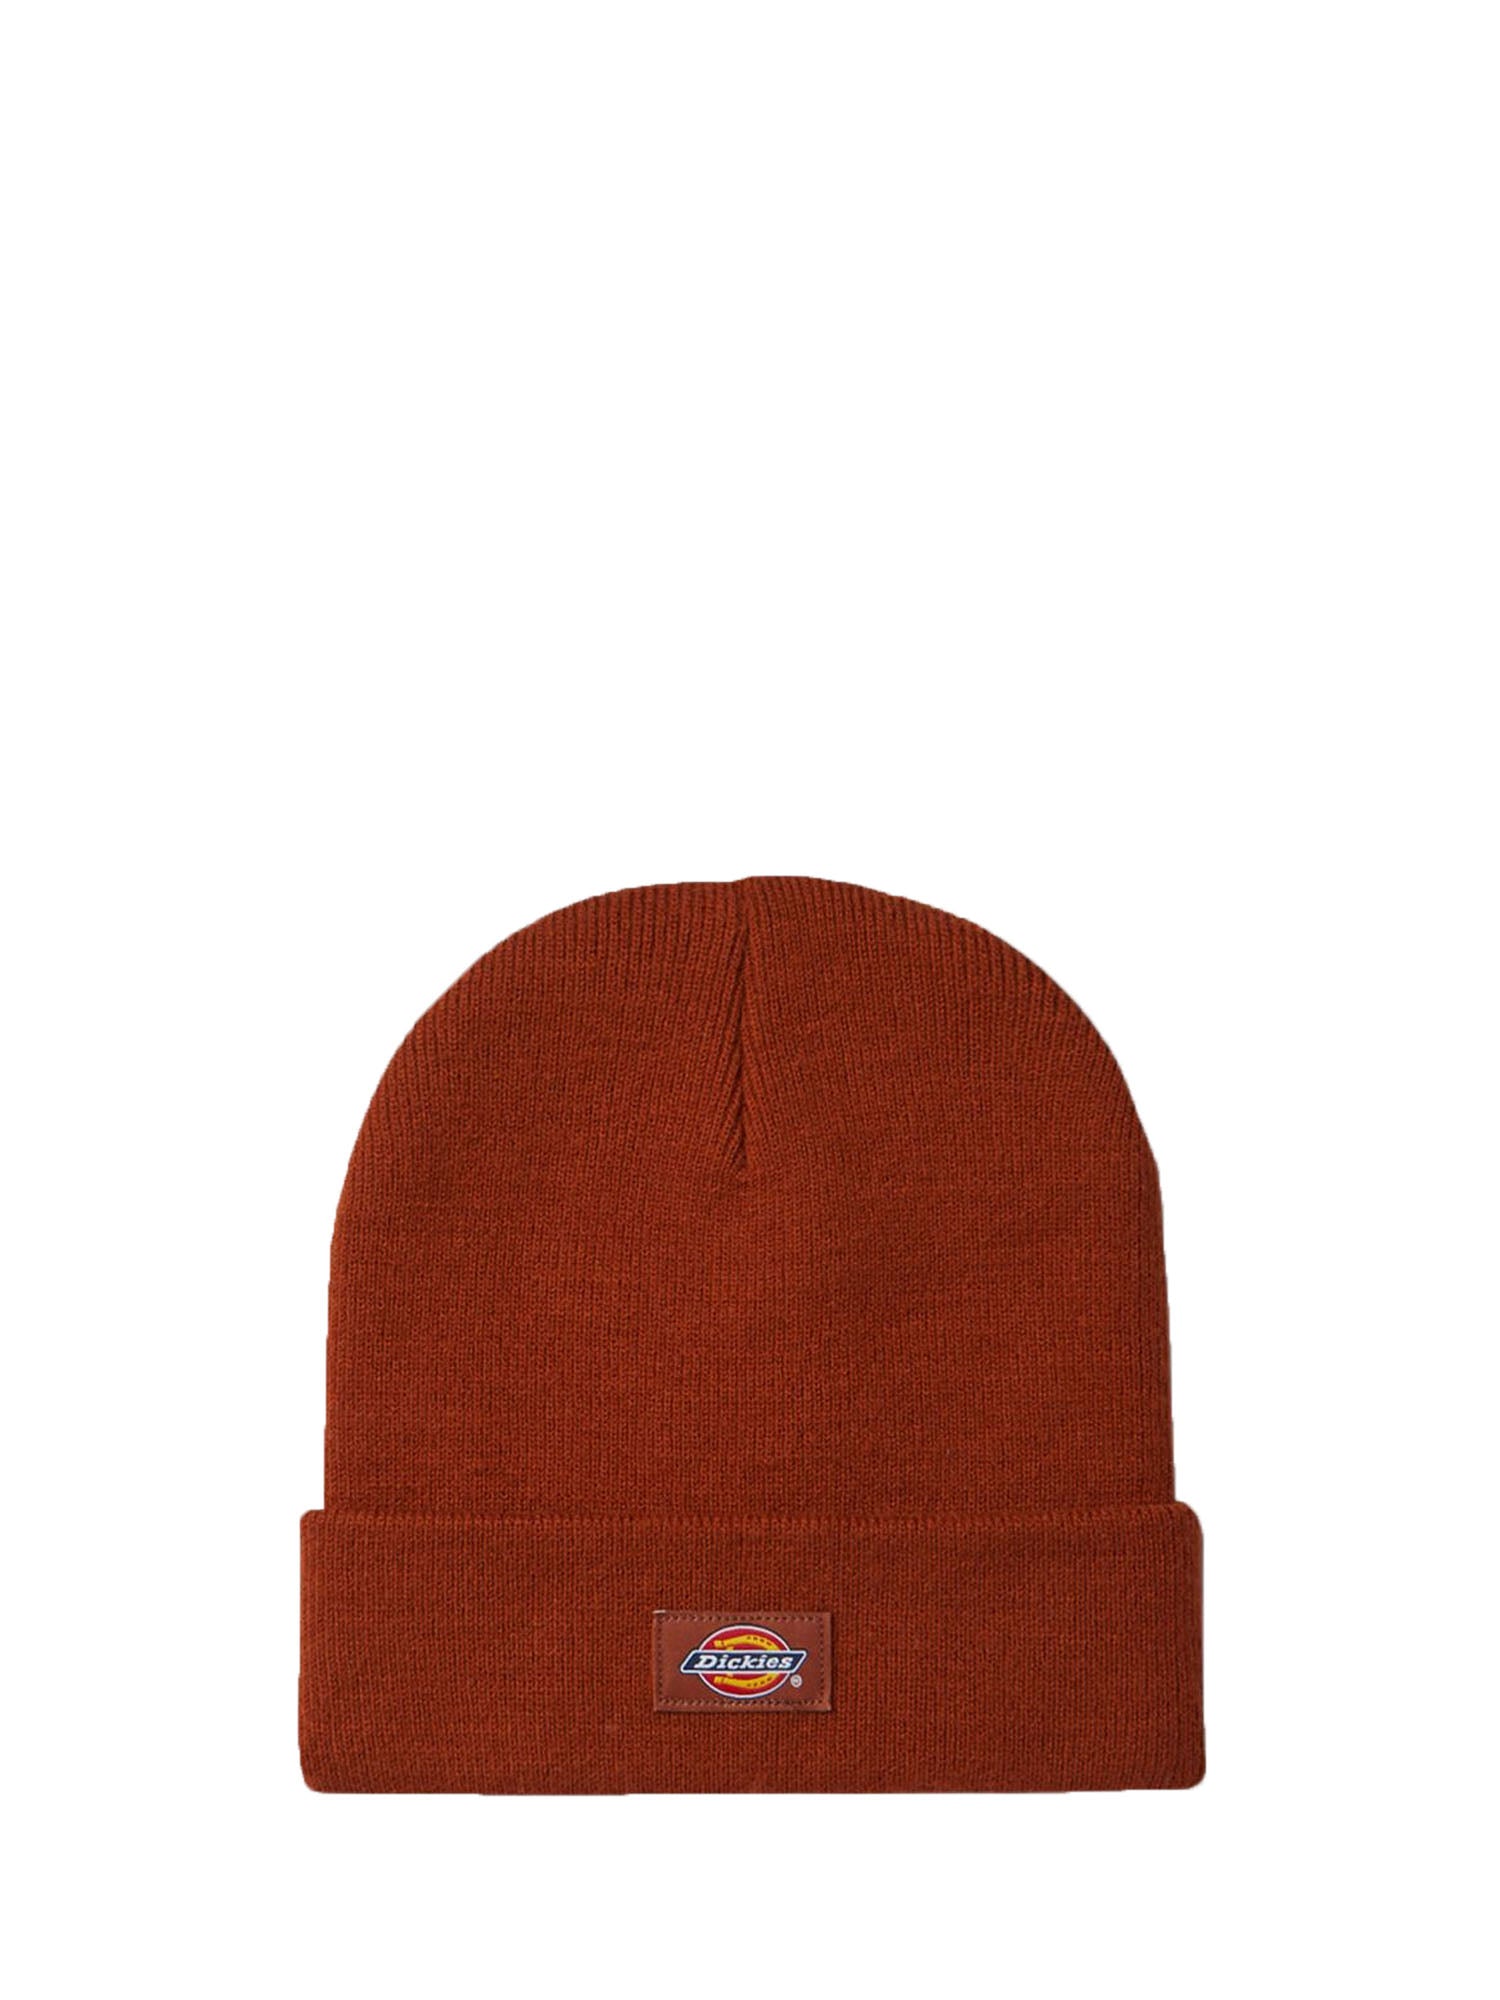 DICKIES CAPPELLO GIBSLAND ROSSO MATTONE